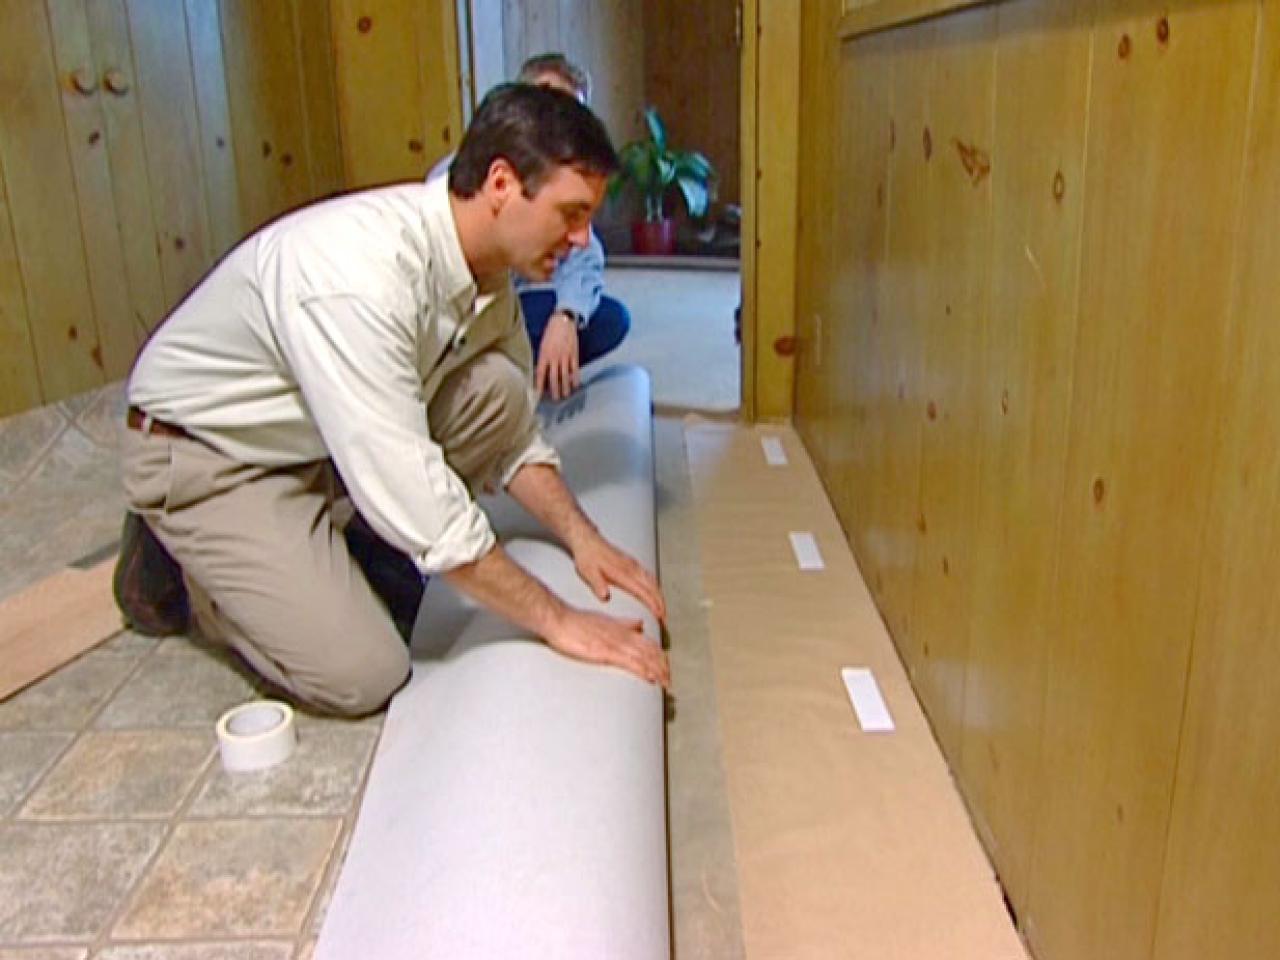 How To Install Vinyl Flooring Tos, How To Install Vinyl Tile On Wood Floor